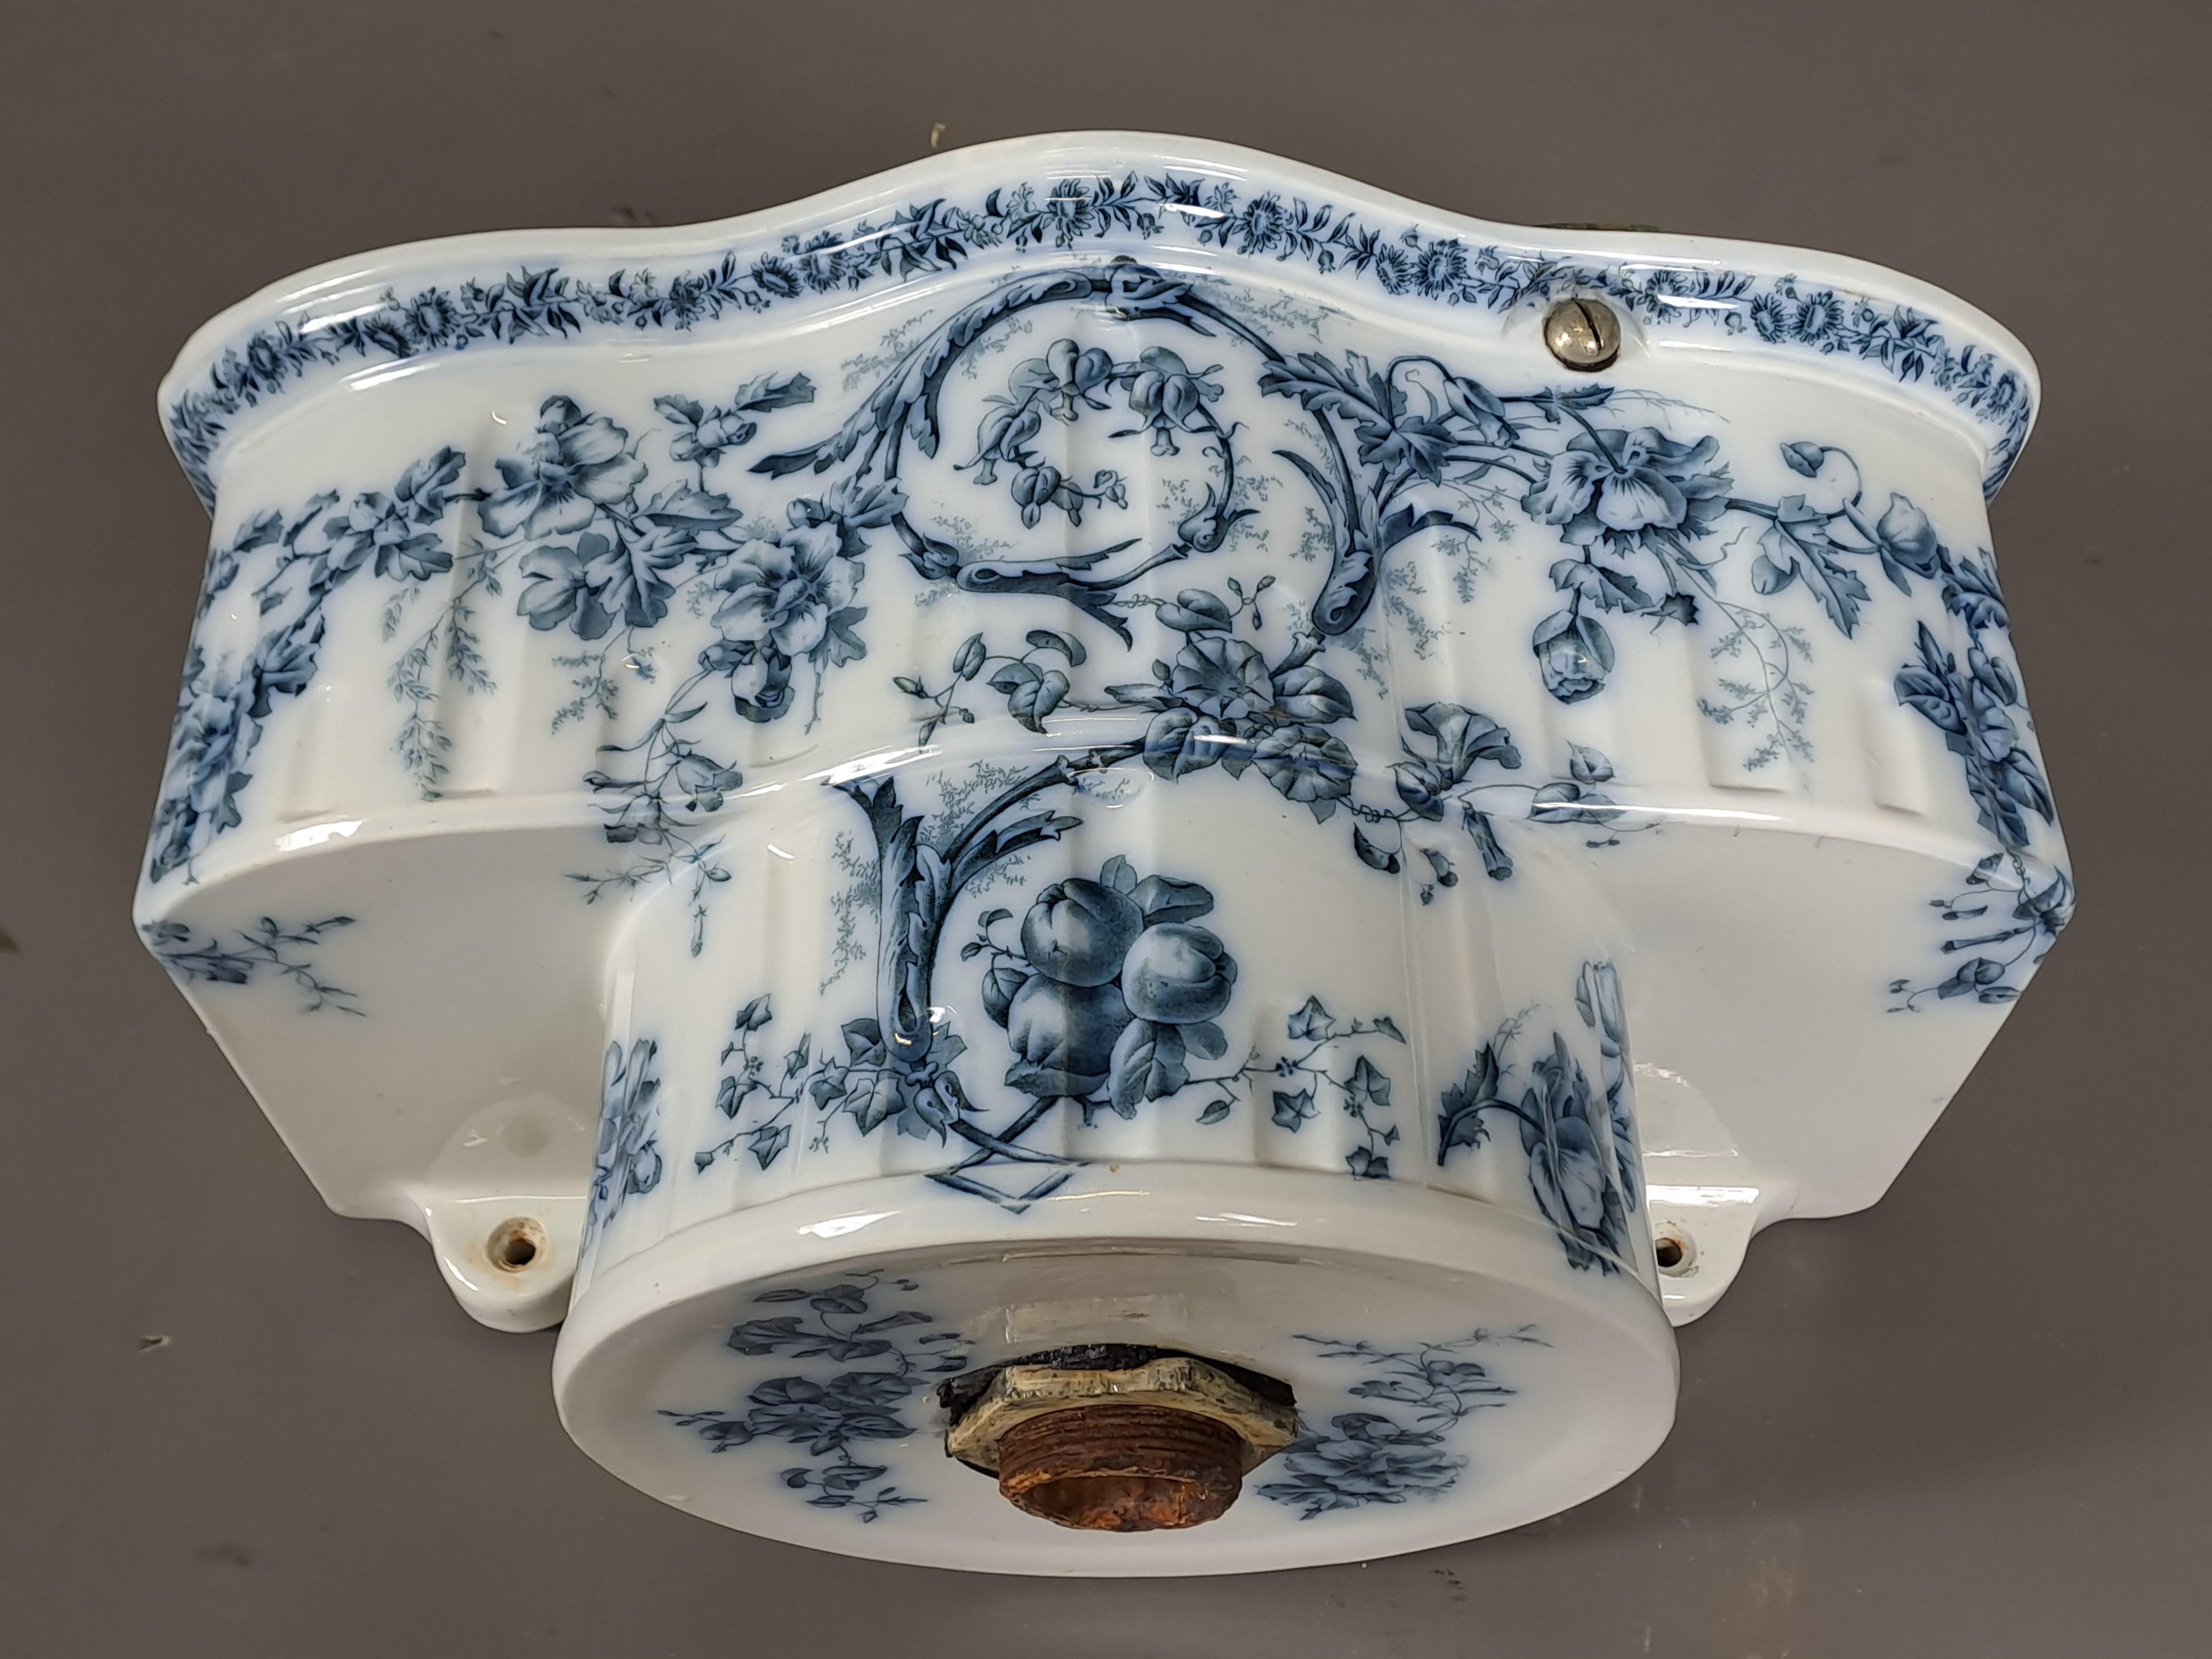 19th Century Rare Old Toilet Tank And Its Soap Dish In Fine English Porcelain